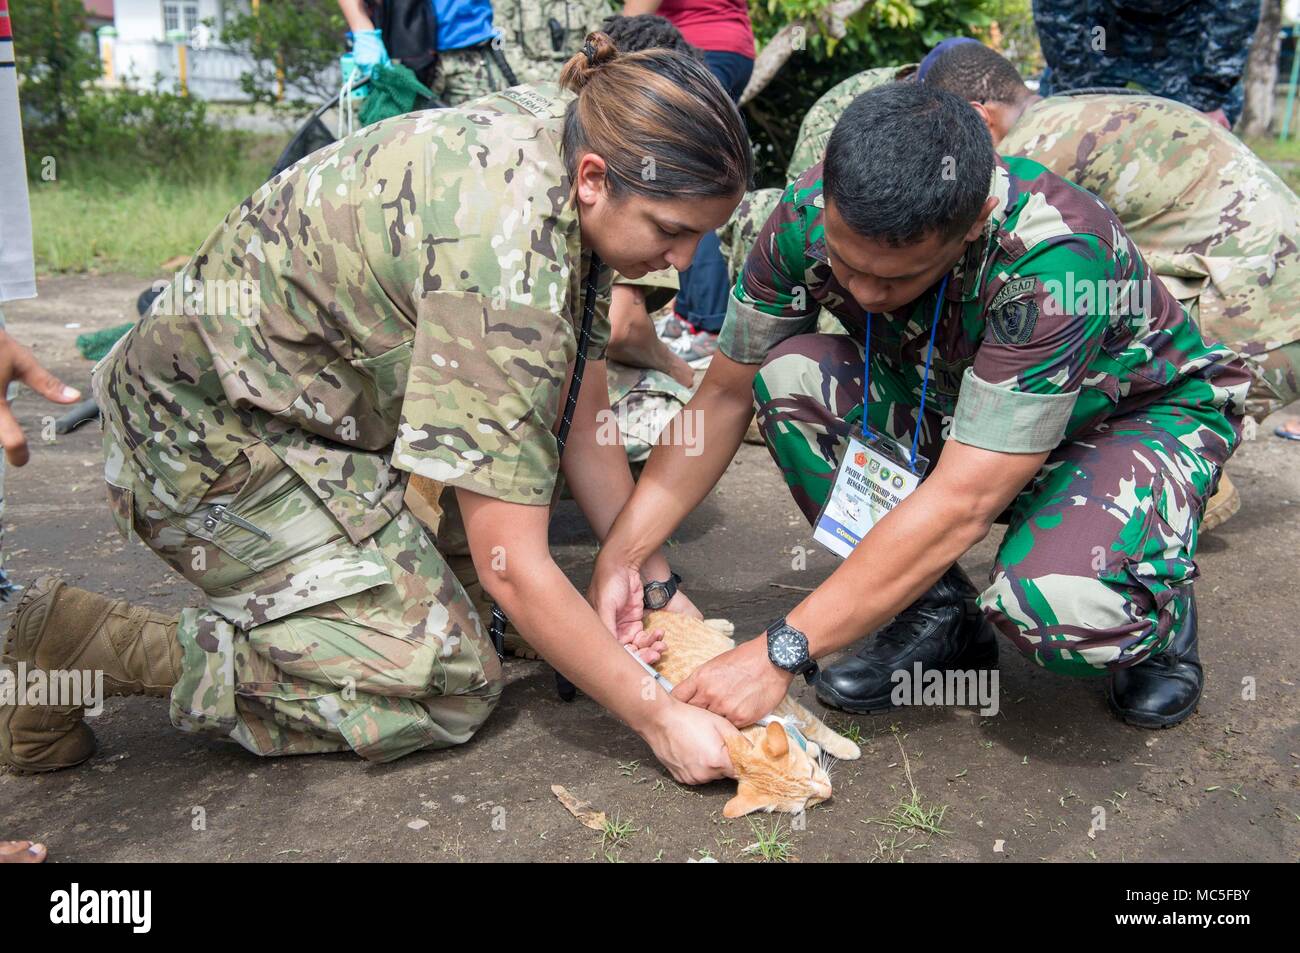 180404-N-MD713-0119  BENGKULU, Indonesia (April 4, 2018) Army Spc. Toni Weaver (left), from Castroville, Texas, who is currently assigned to Military Sealift Command hospital ship USNS Mercy (T-AH 19,) demonstrates proper feline handling techniques during a rabies vaccination event.  Weaver and other service members are currently deployed in support of Pacific Partnership 2018. PP18’s mission is to work collectively with host and partner nations to enhance regional interoperability and disaster response capabilities, increase stability and security in the region, and foster new and enduring fr Stock Photo